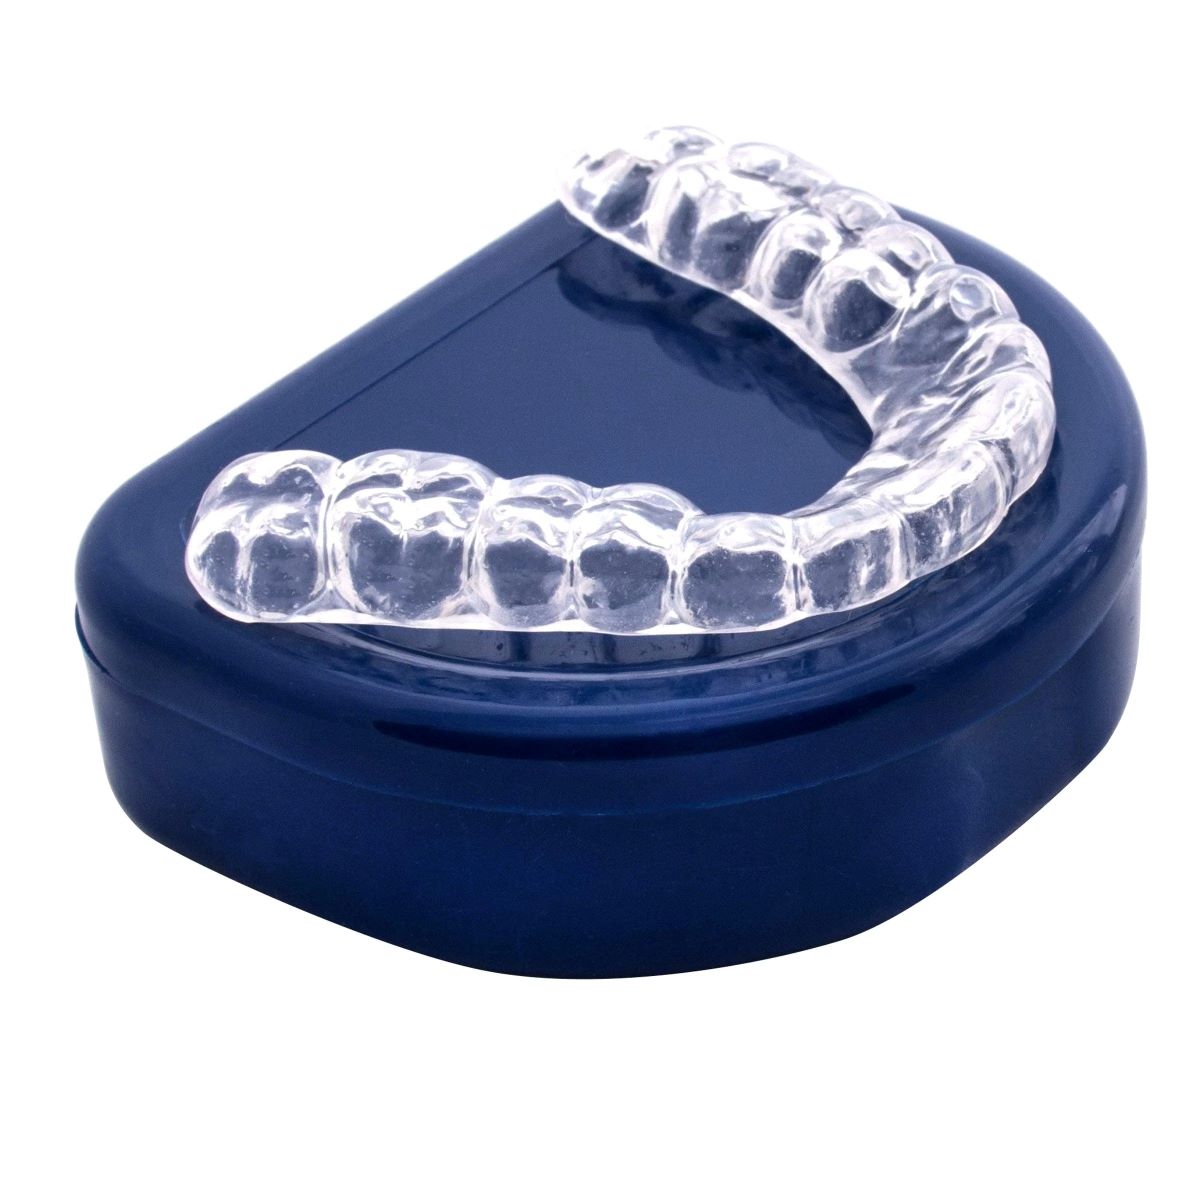 How To Store Mouth Guard